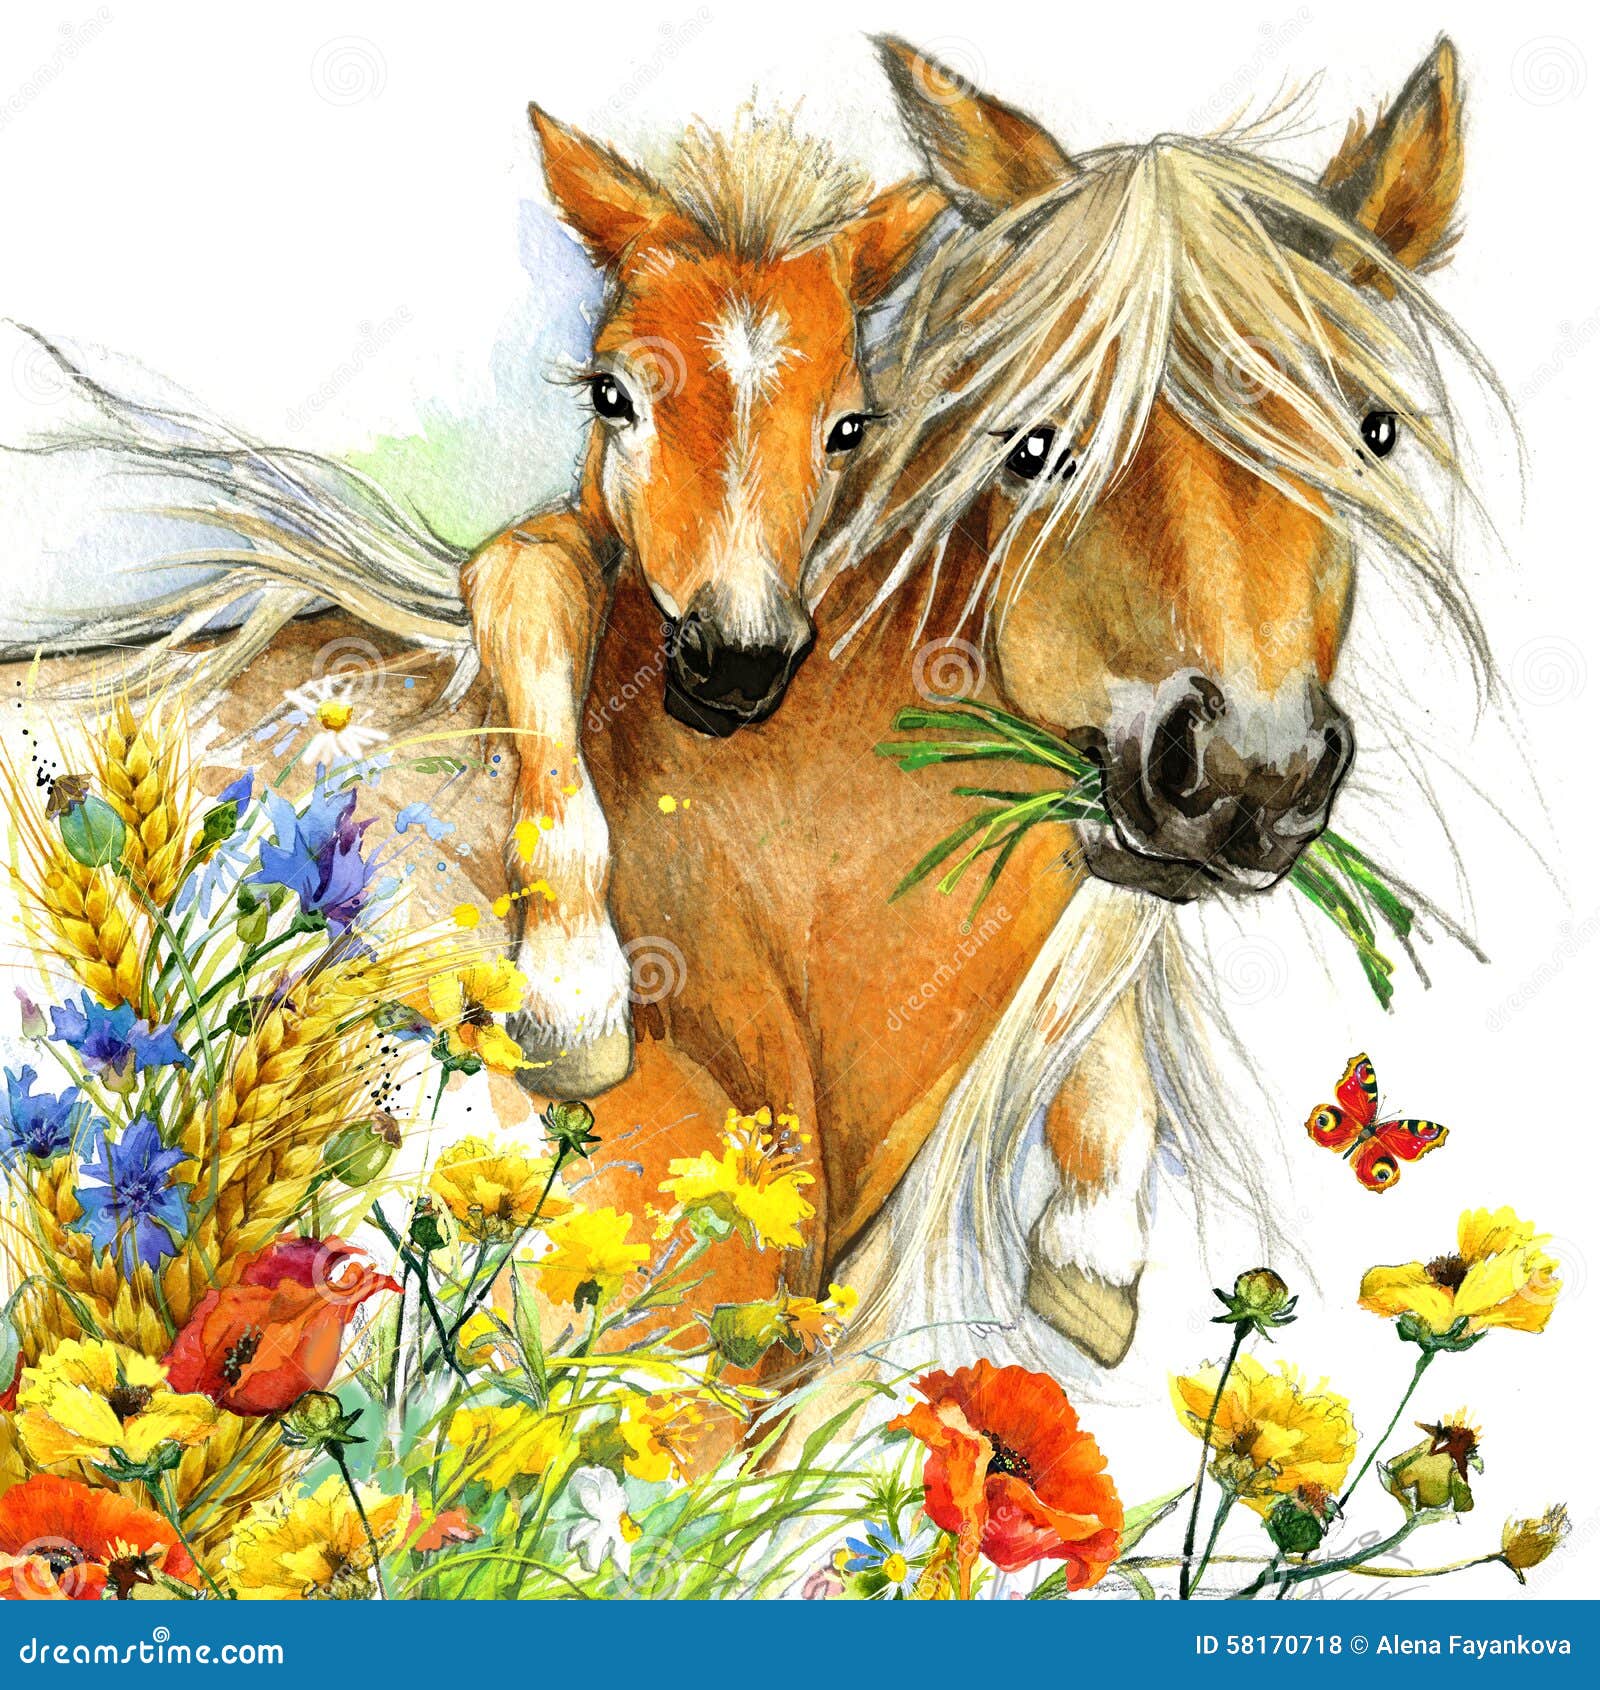 3D Lenticular Picture Meadow Scene Horse with foals butterflies flowers 39x29 cm